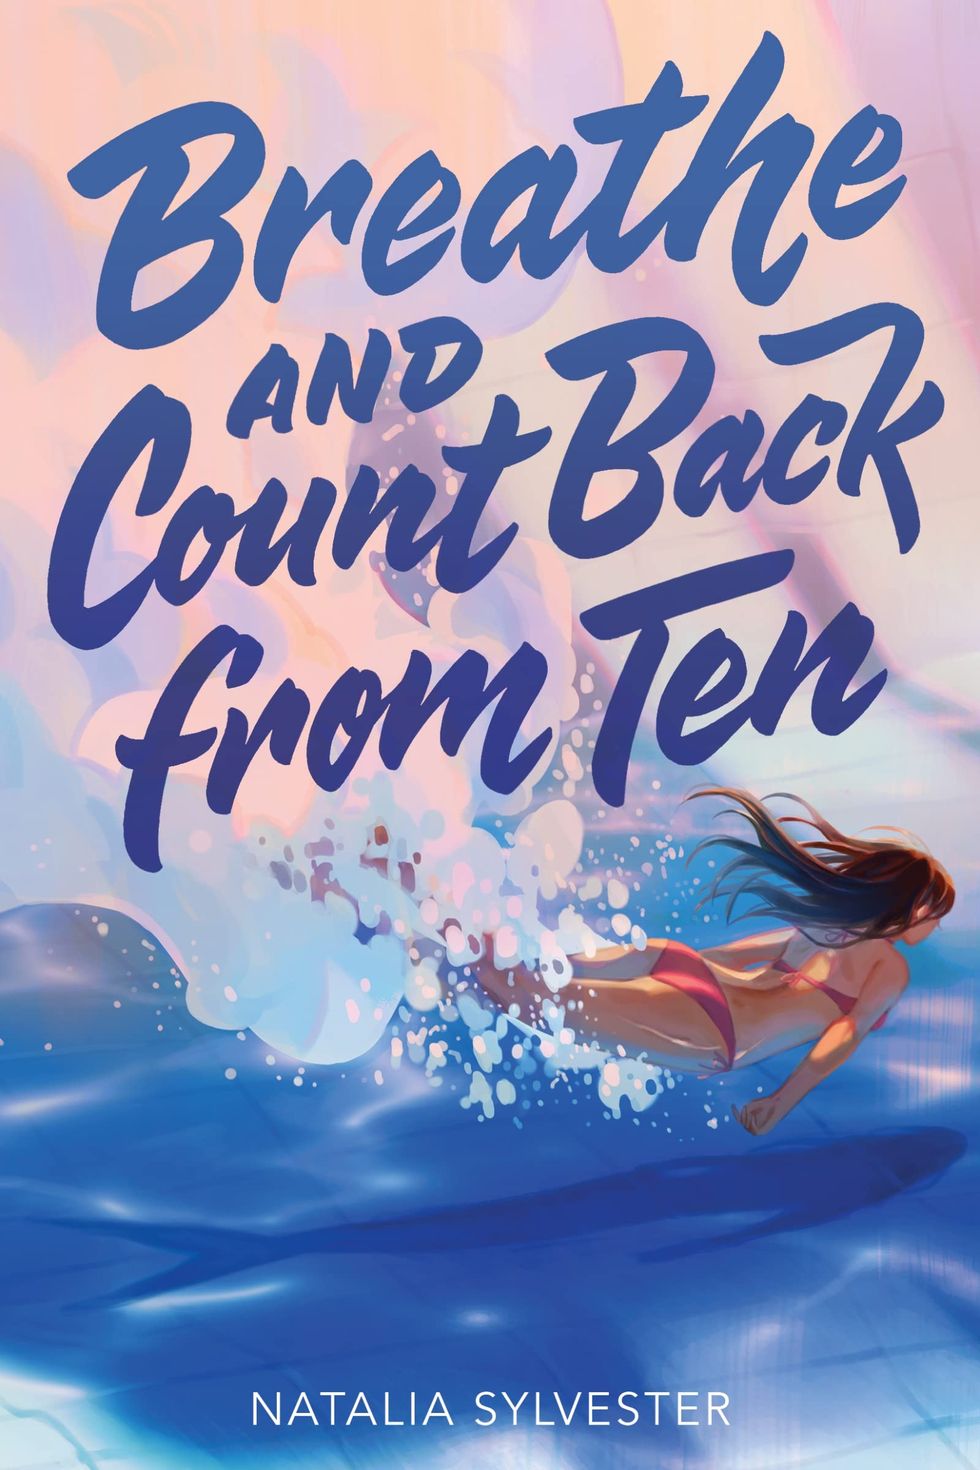 Breathe and Count Back from Ten by Natalie Sylvester